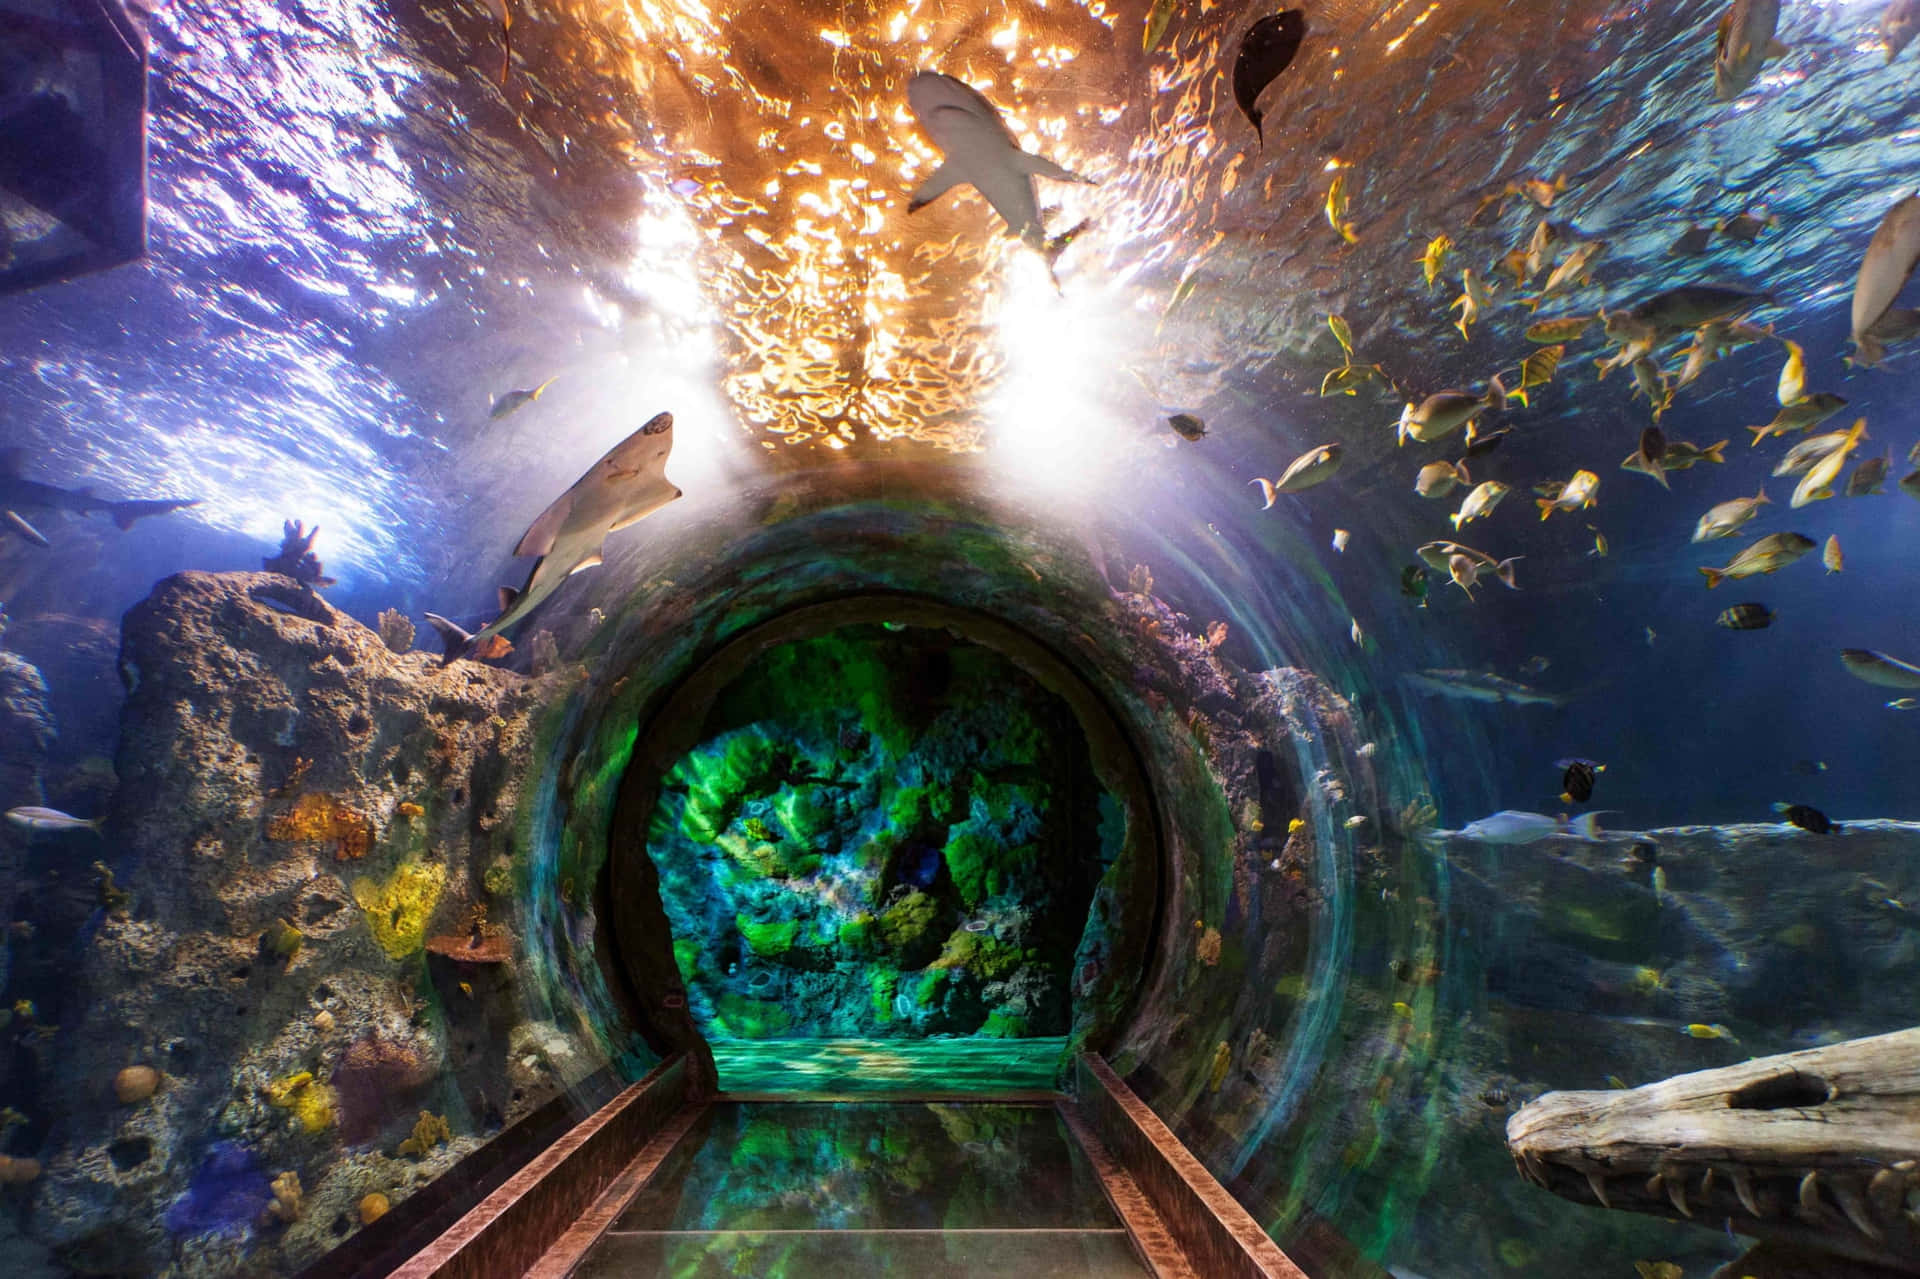 'The vibrant colors present in this aquarium create an aquatic paradise for viewers to observe.'